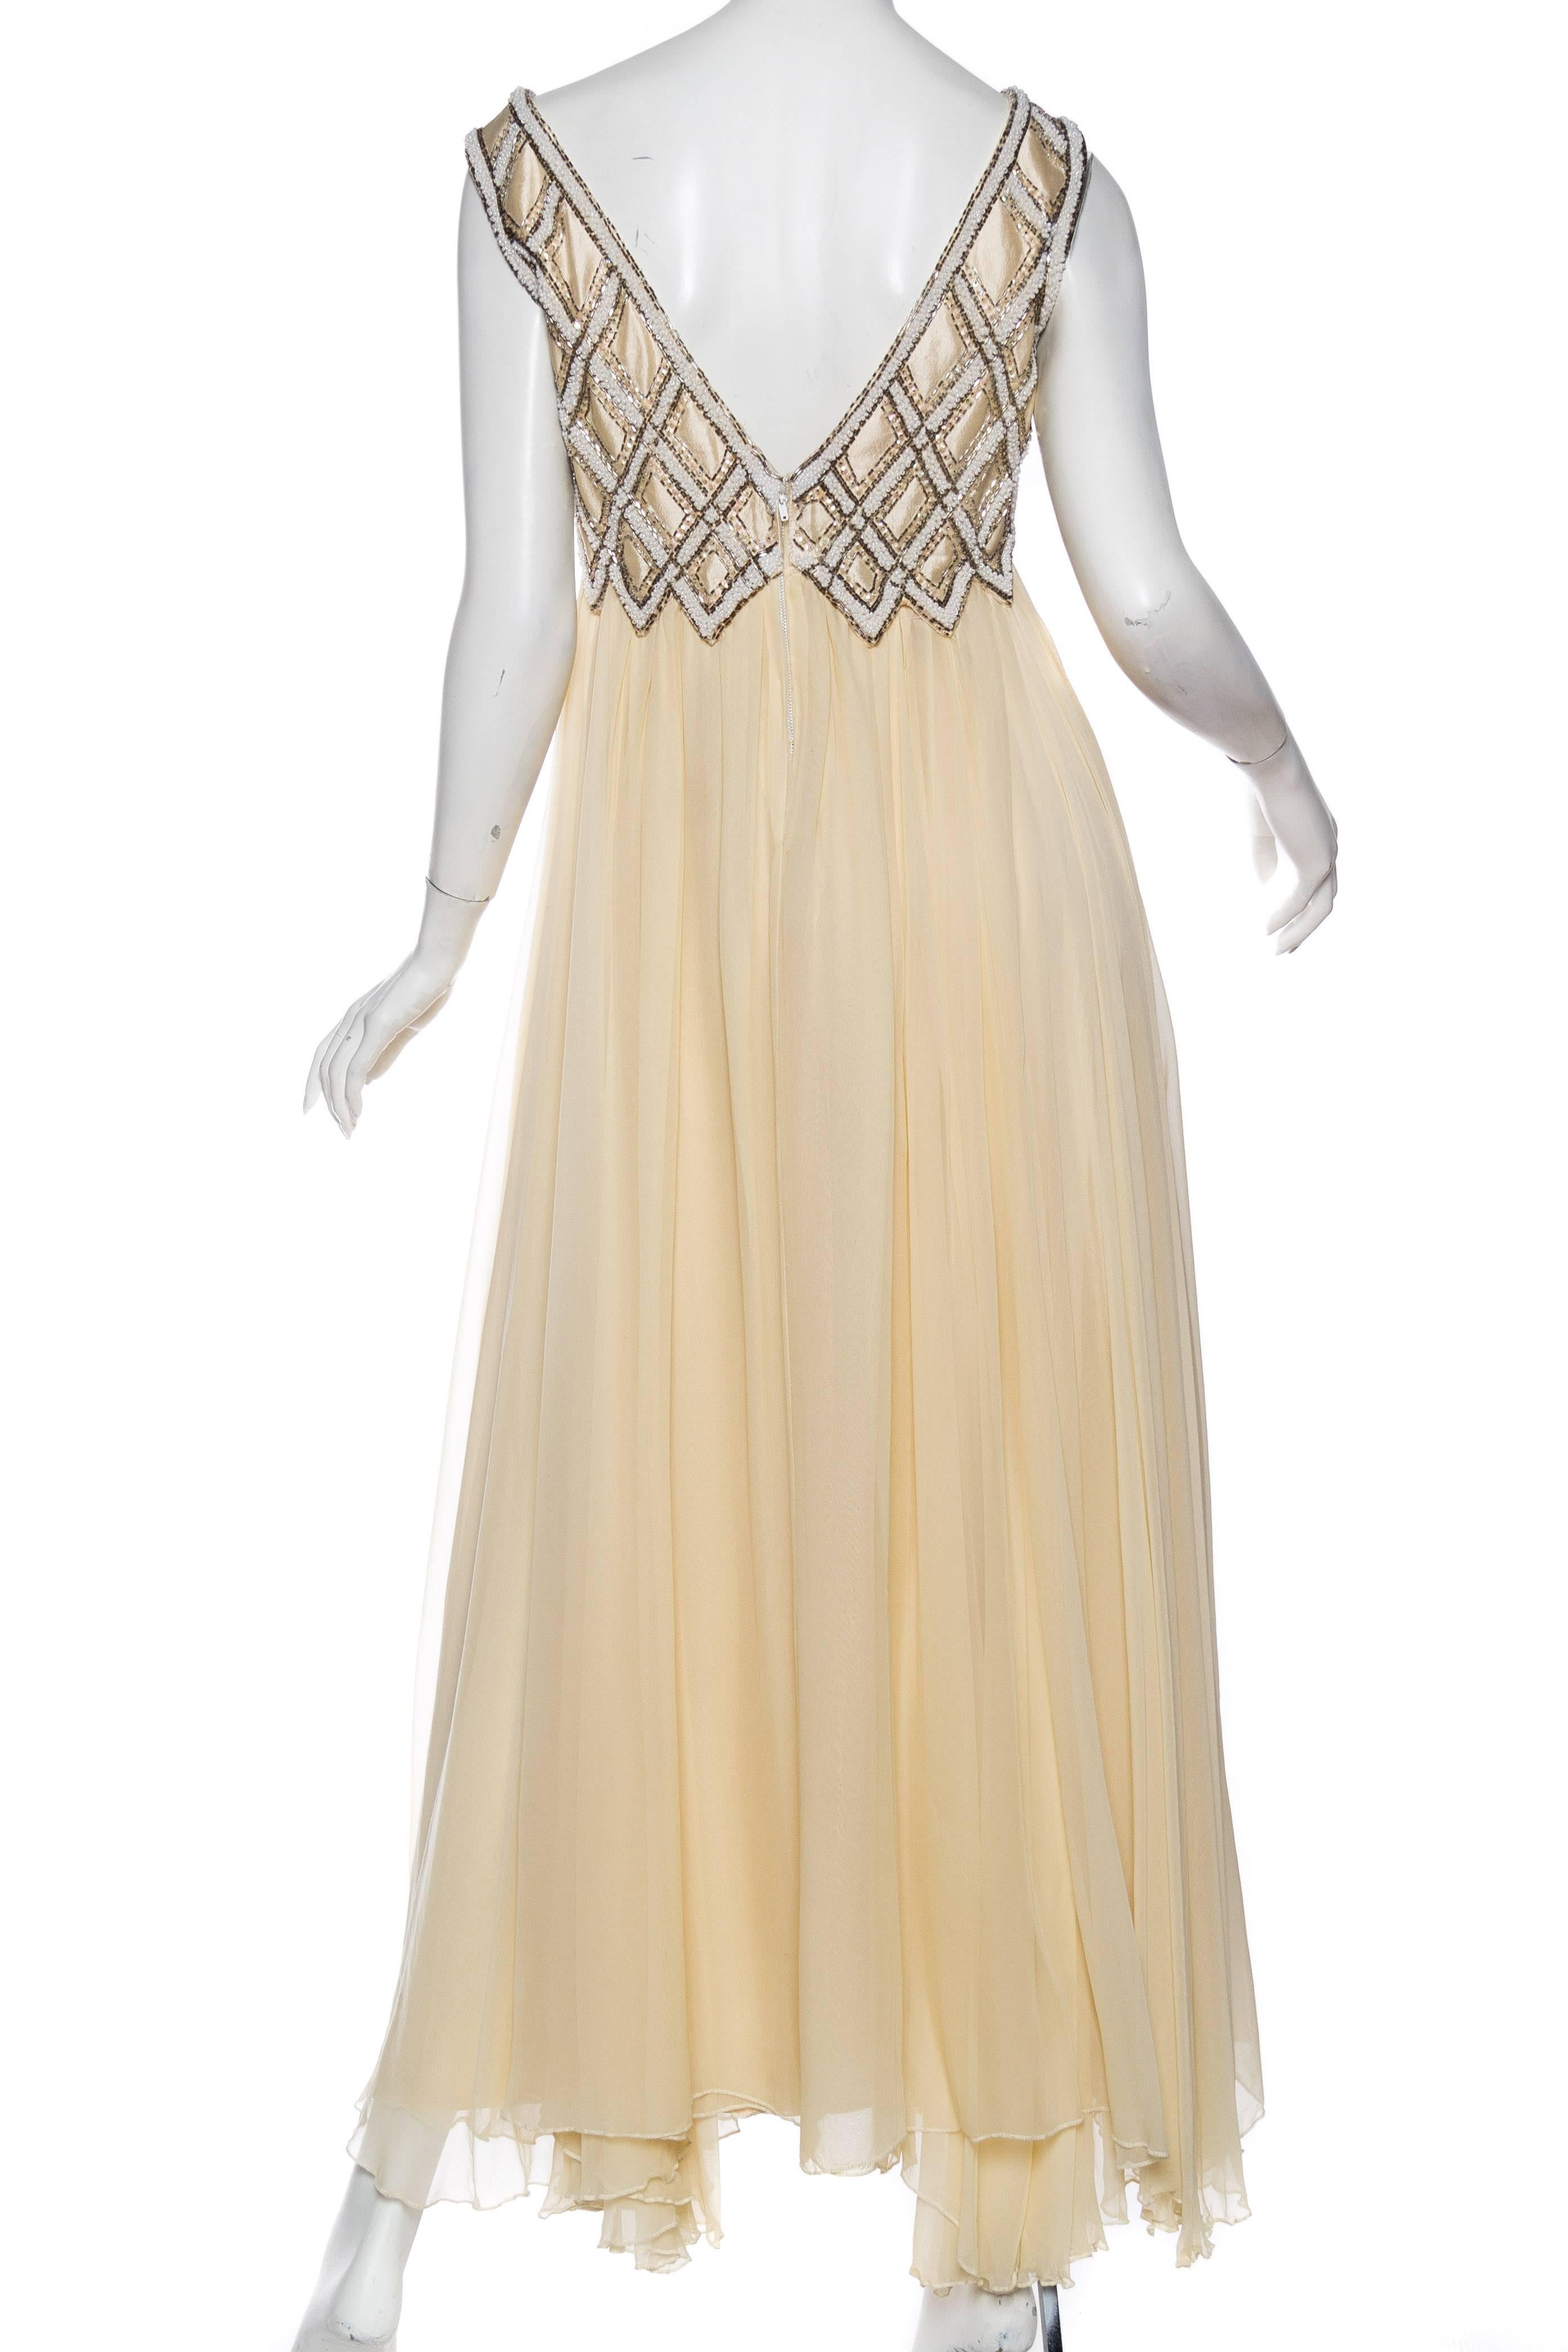 1960S Cream Beaded Silk Chiffon Empire Waist Gown With Matching Evening Bolero In Excellent Condition For Sale In New York, NY